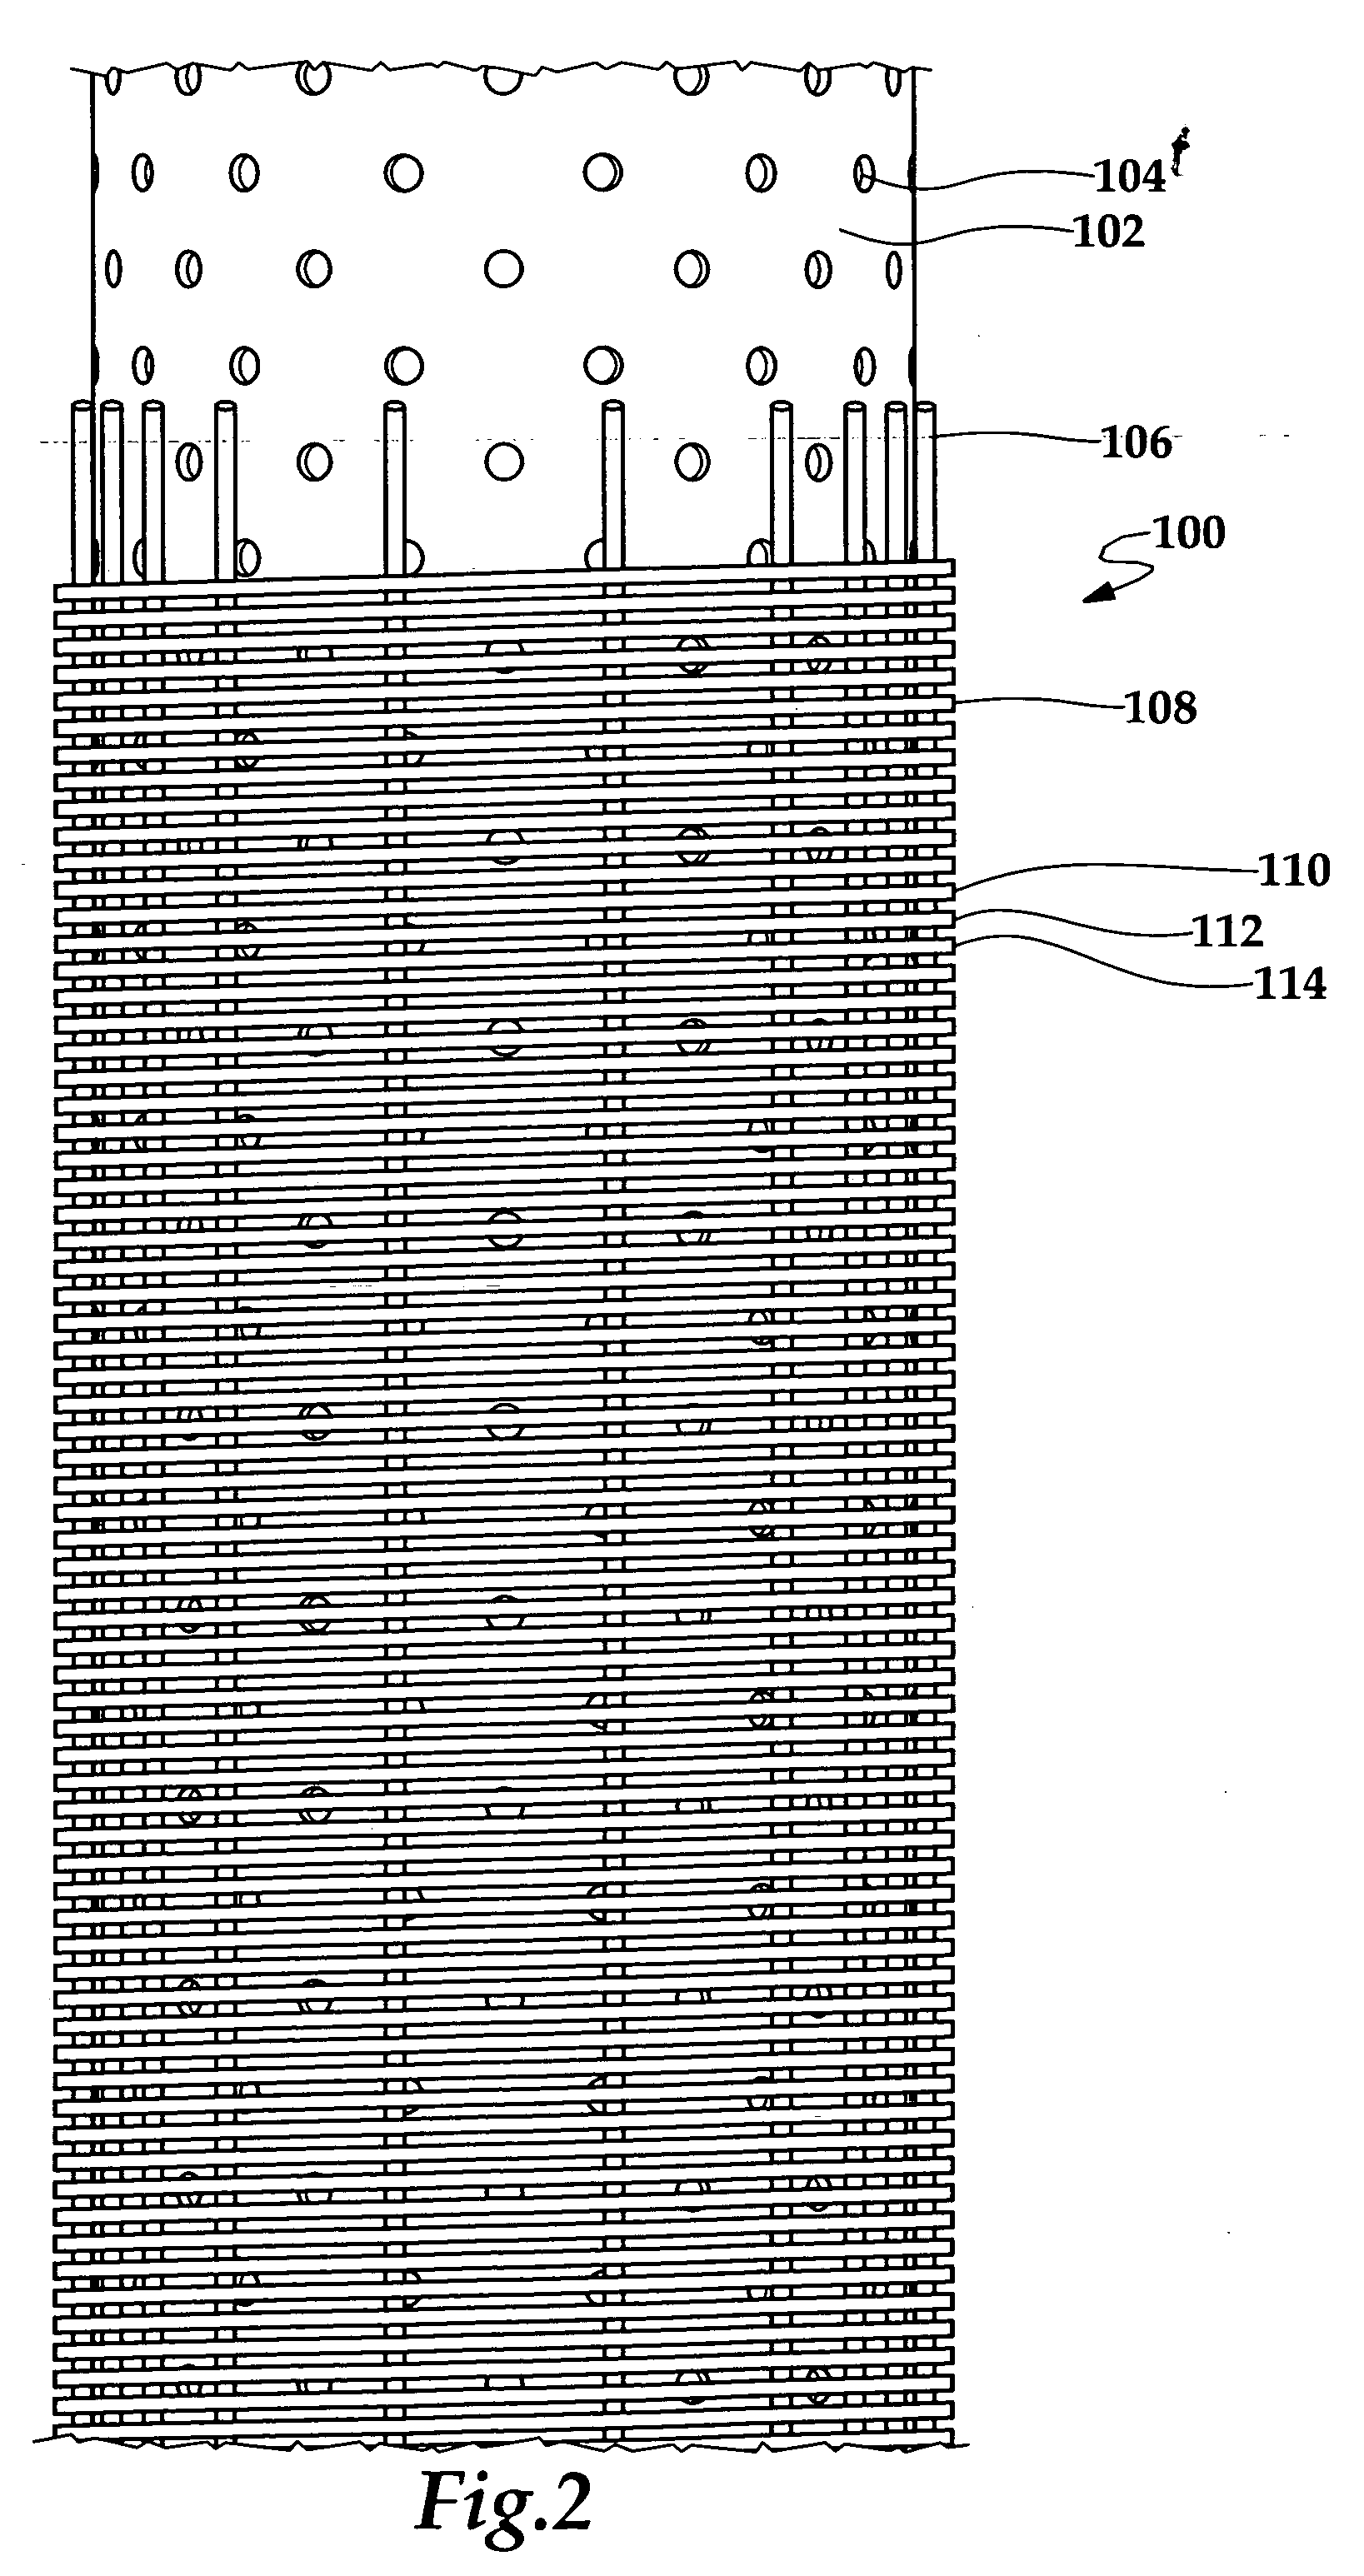 Apparatus and method for reducing water production from a hydrocarbon producing well